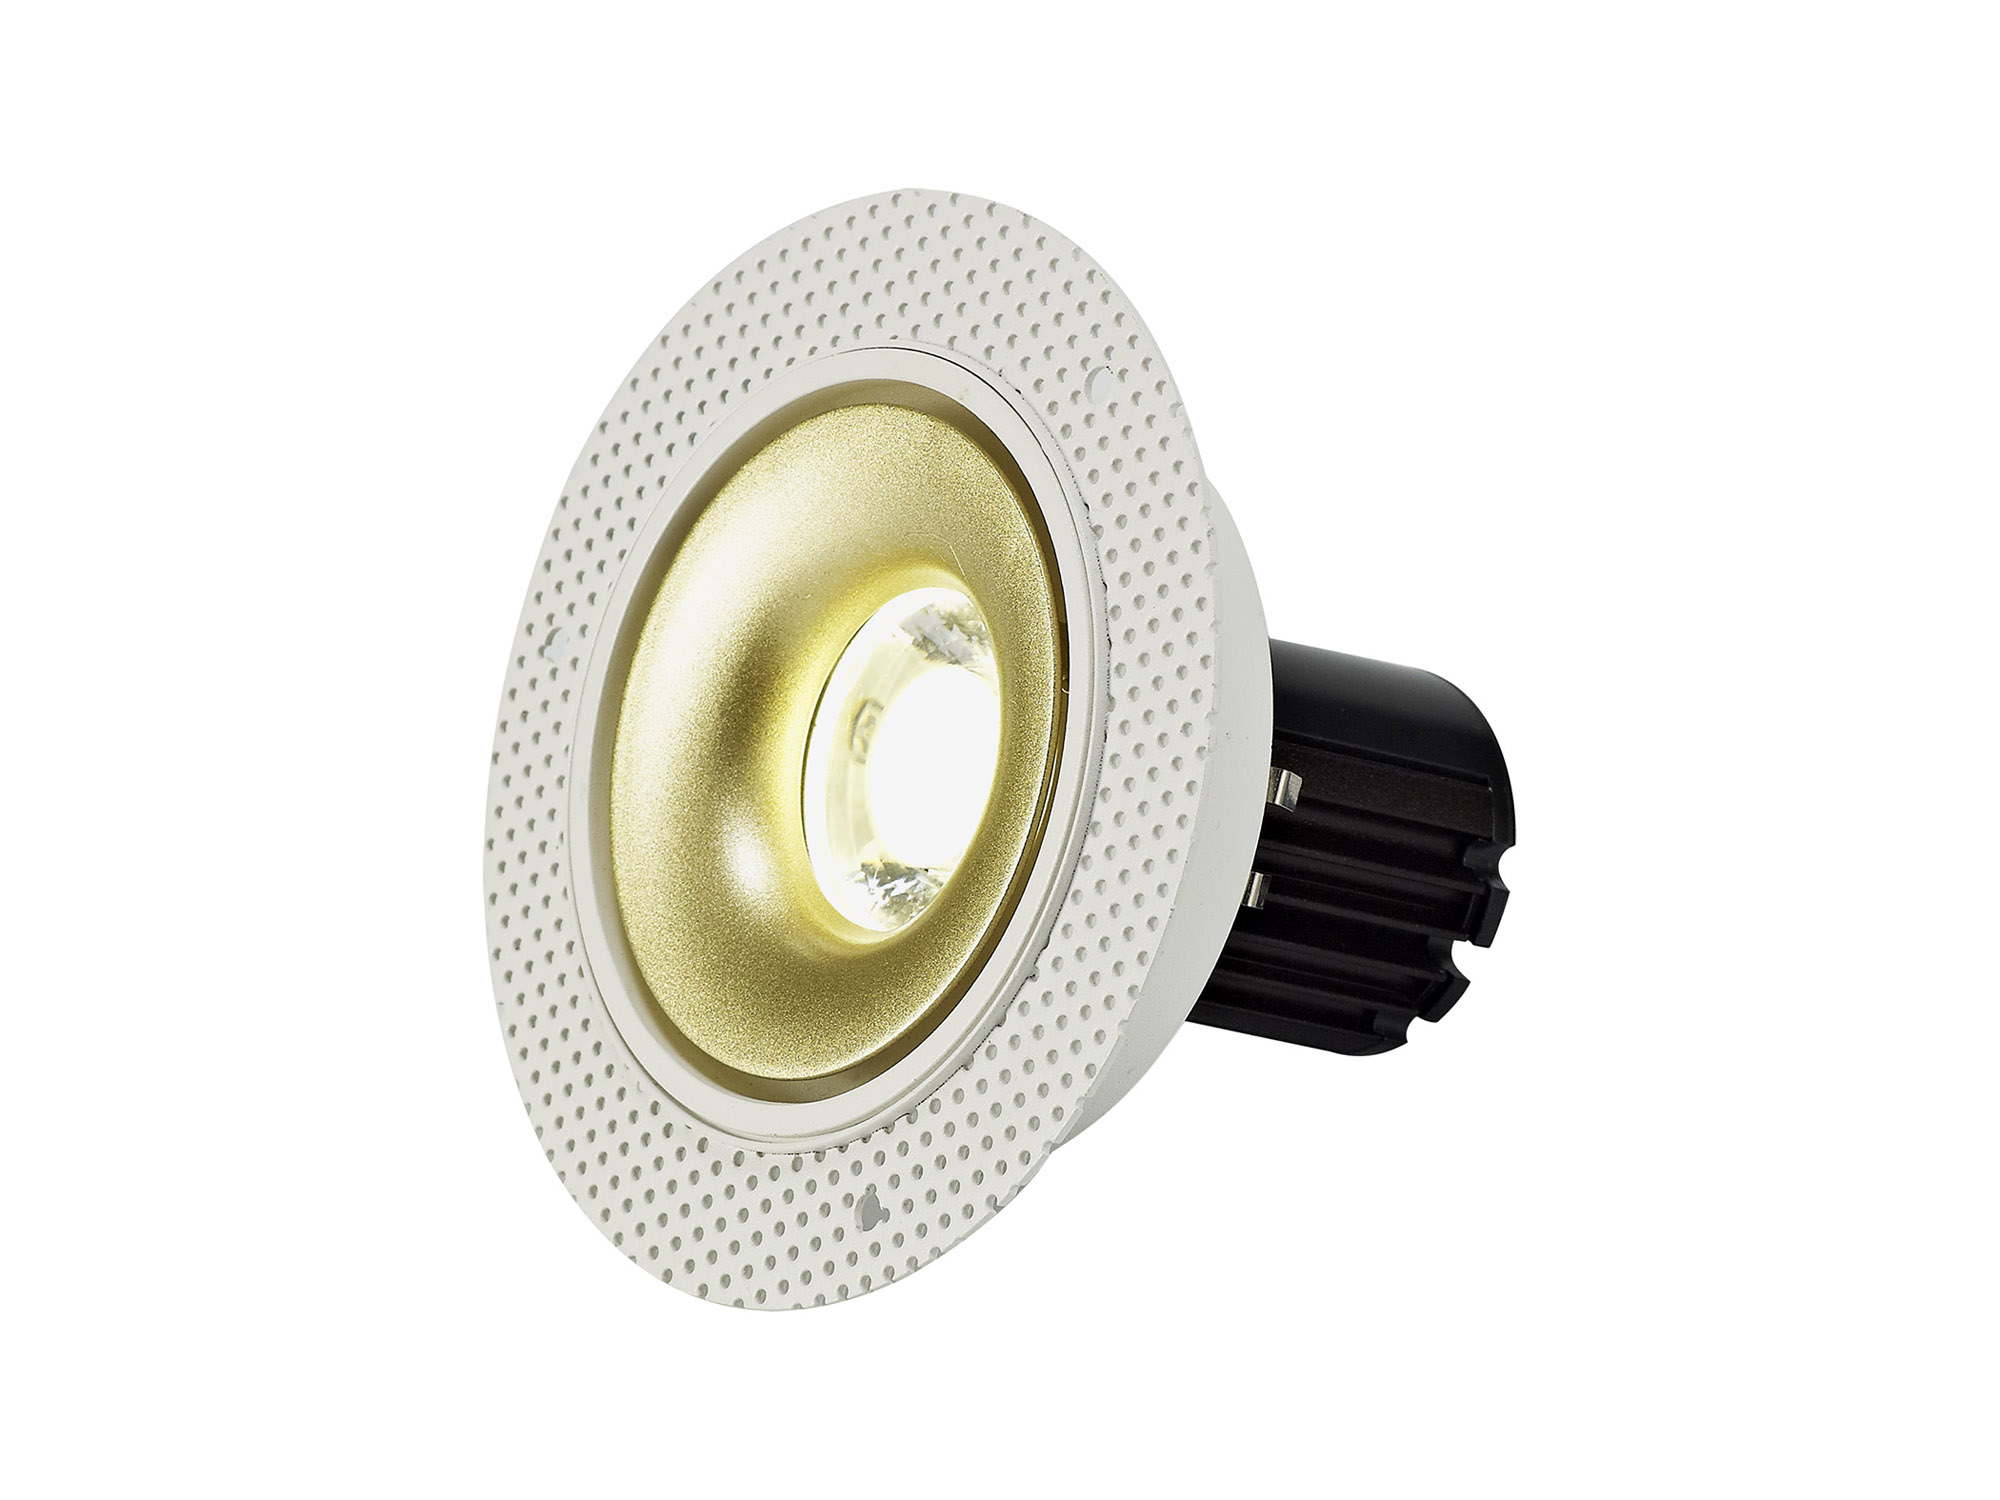 DM201105  Bolor T 10 Tridonic Powered 10W 4000K 810lm 36° CRI>90 LED Engine White/Gold Trimless Fixed Recessed Spotlight, IP20